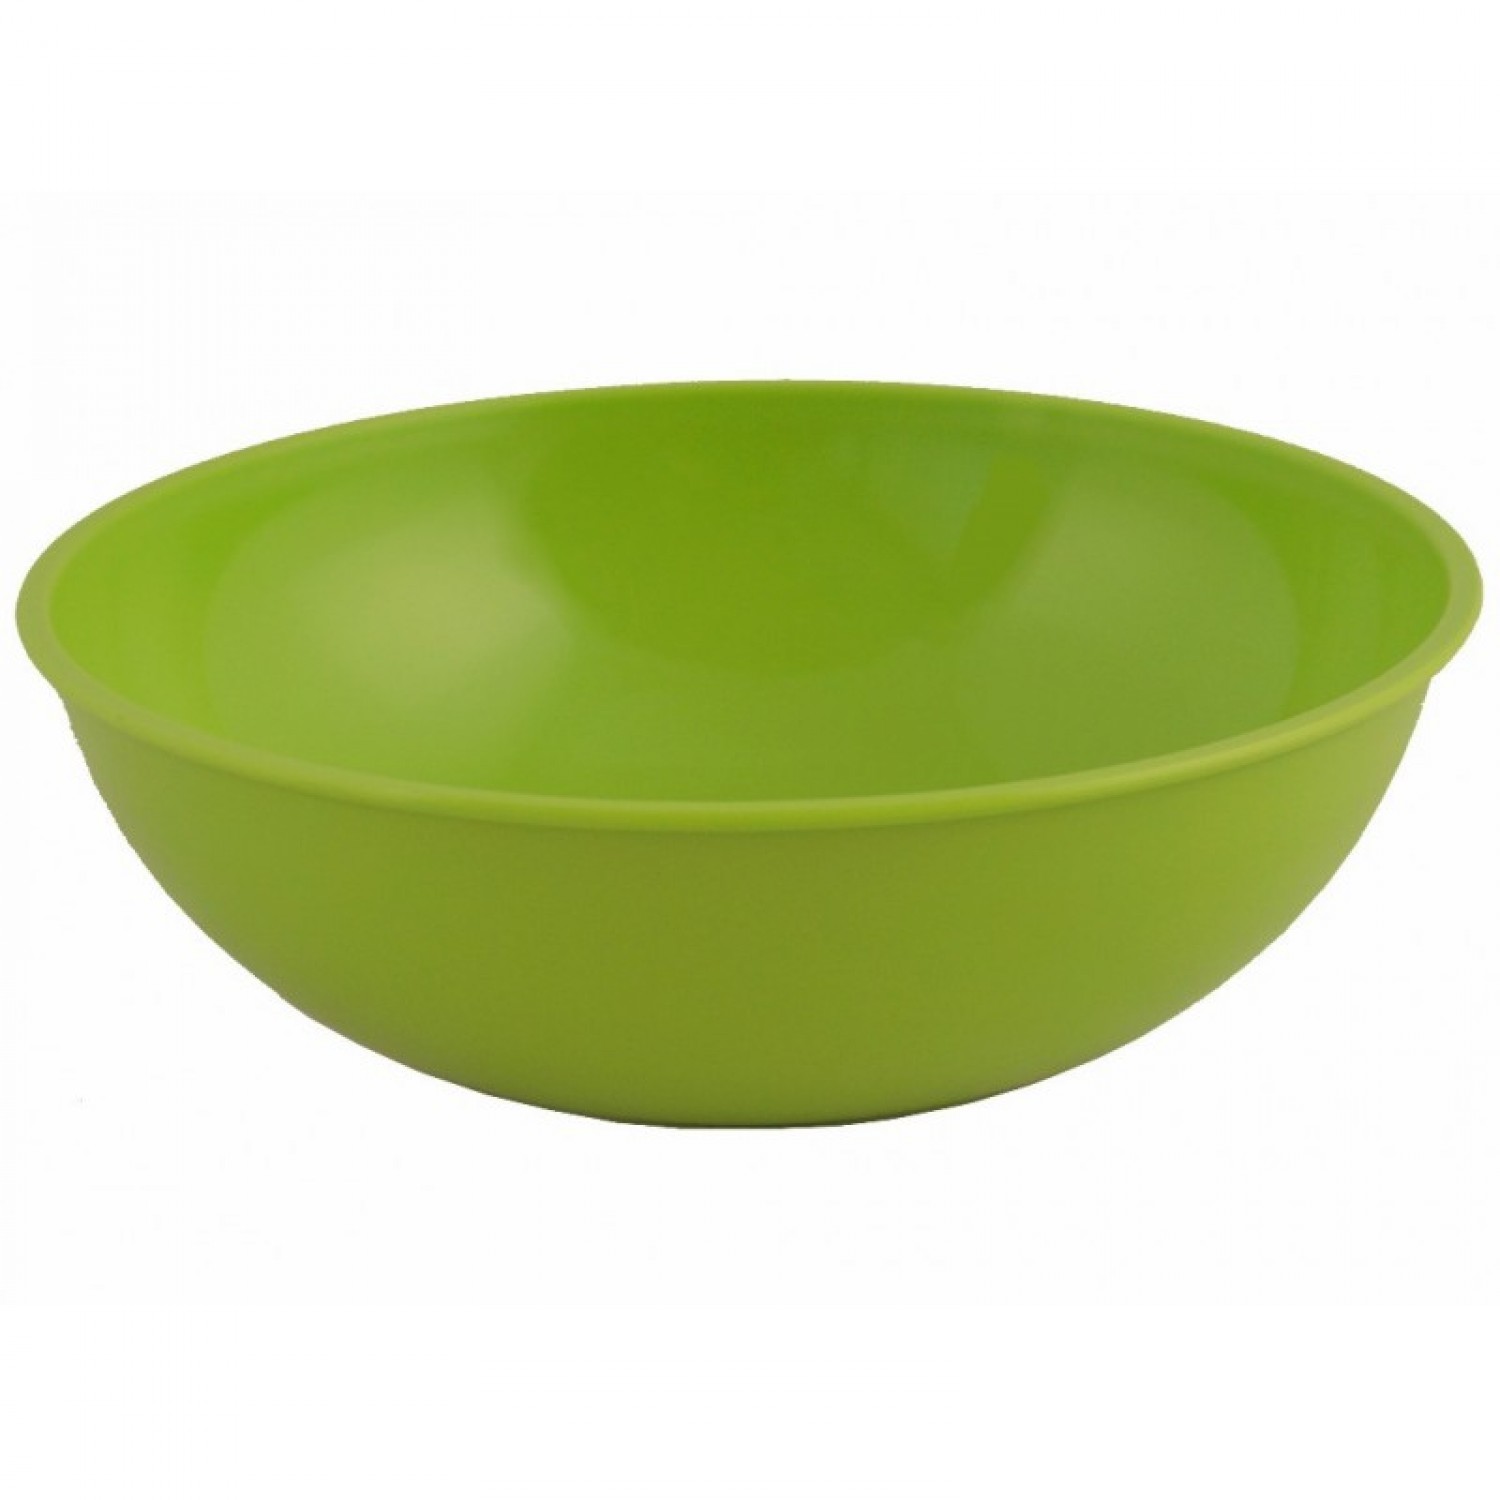 Greenline Cereals Bowl made of bioplastic | Gies